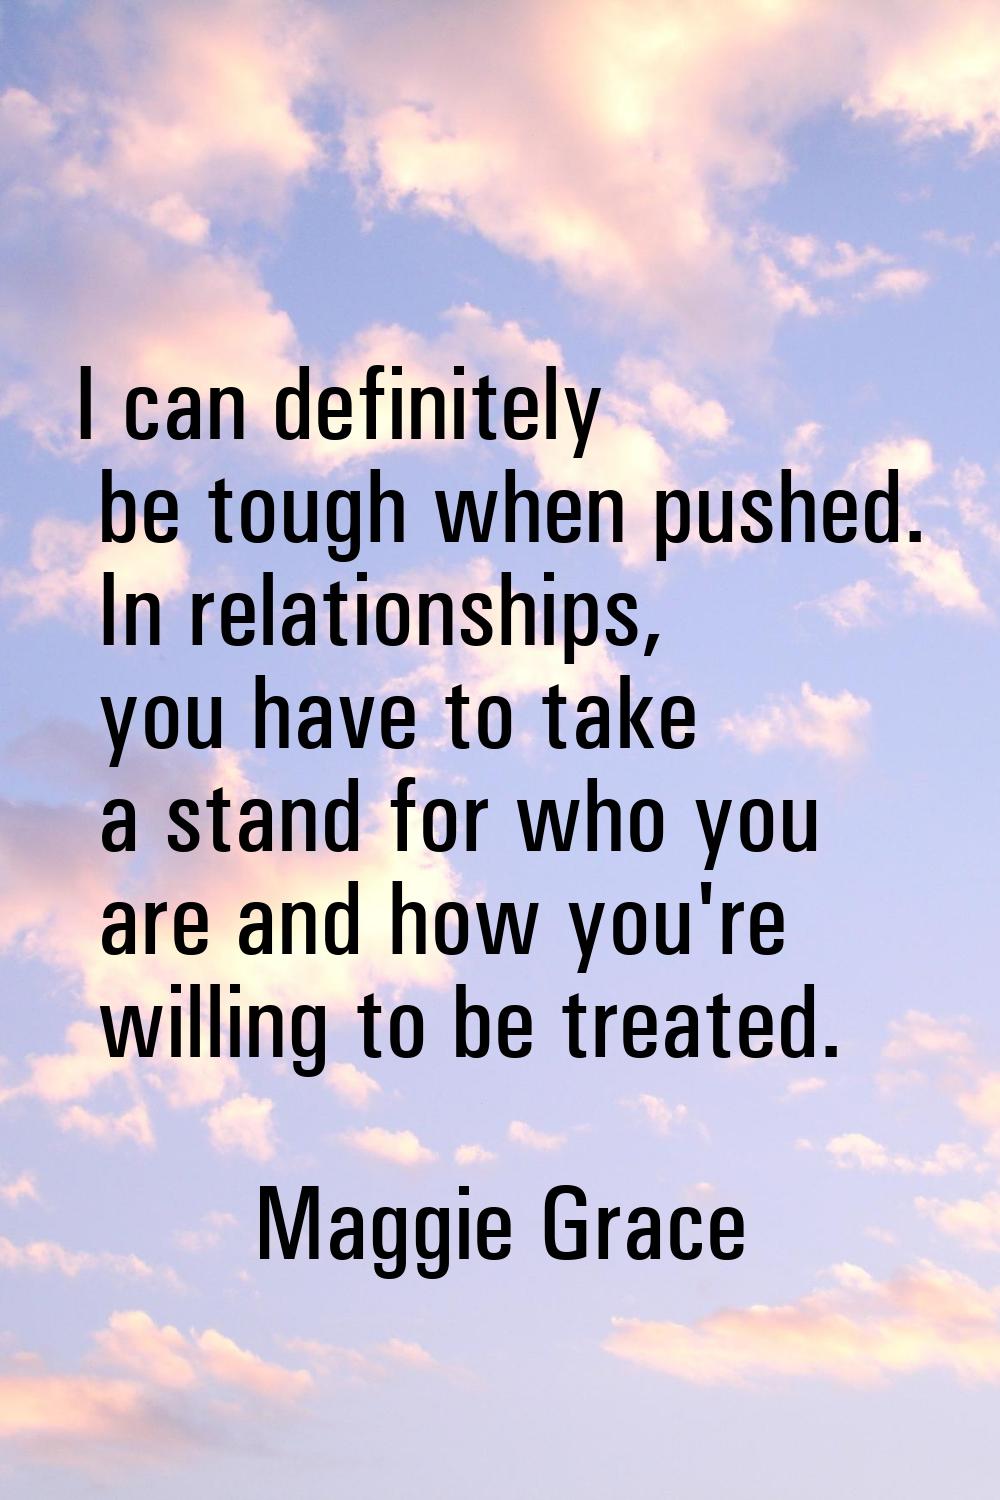 I can definitely be tough when pushed. In relationships, you have to take a stand for who you are a